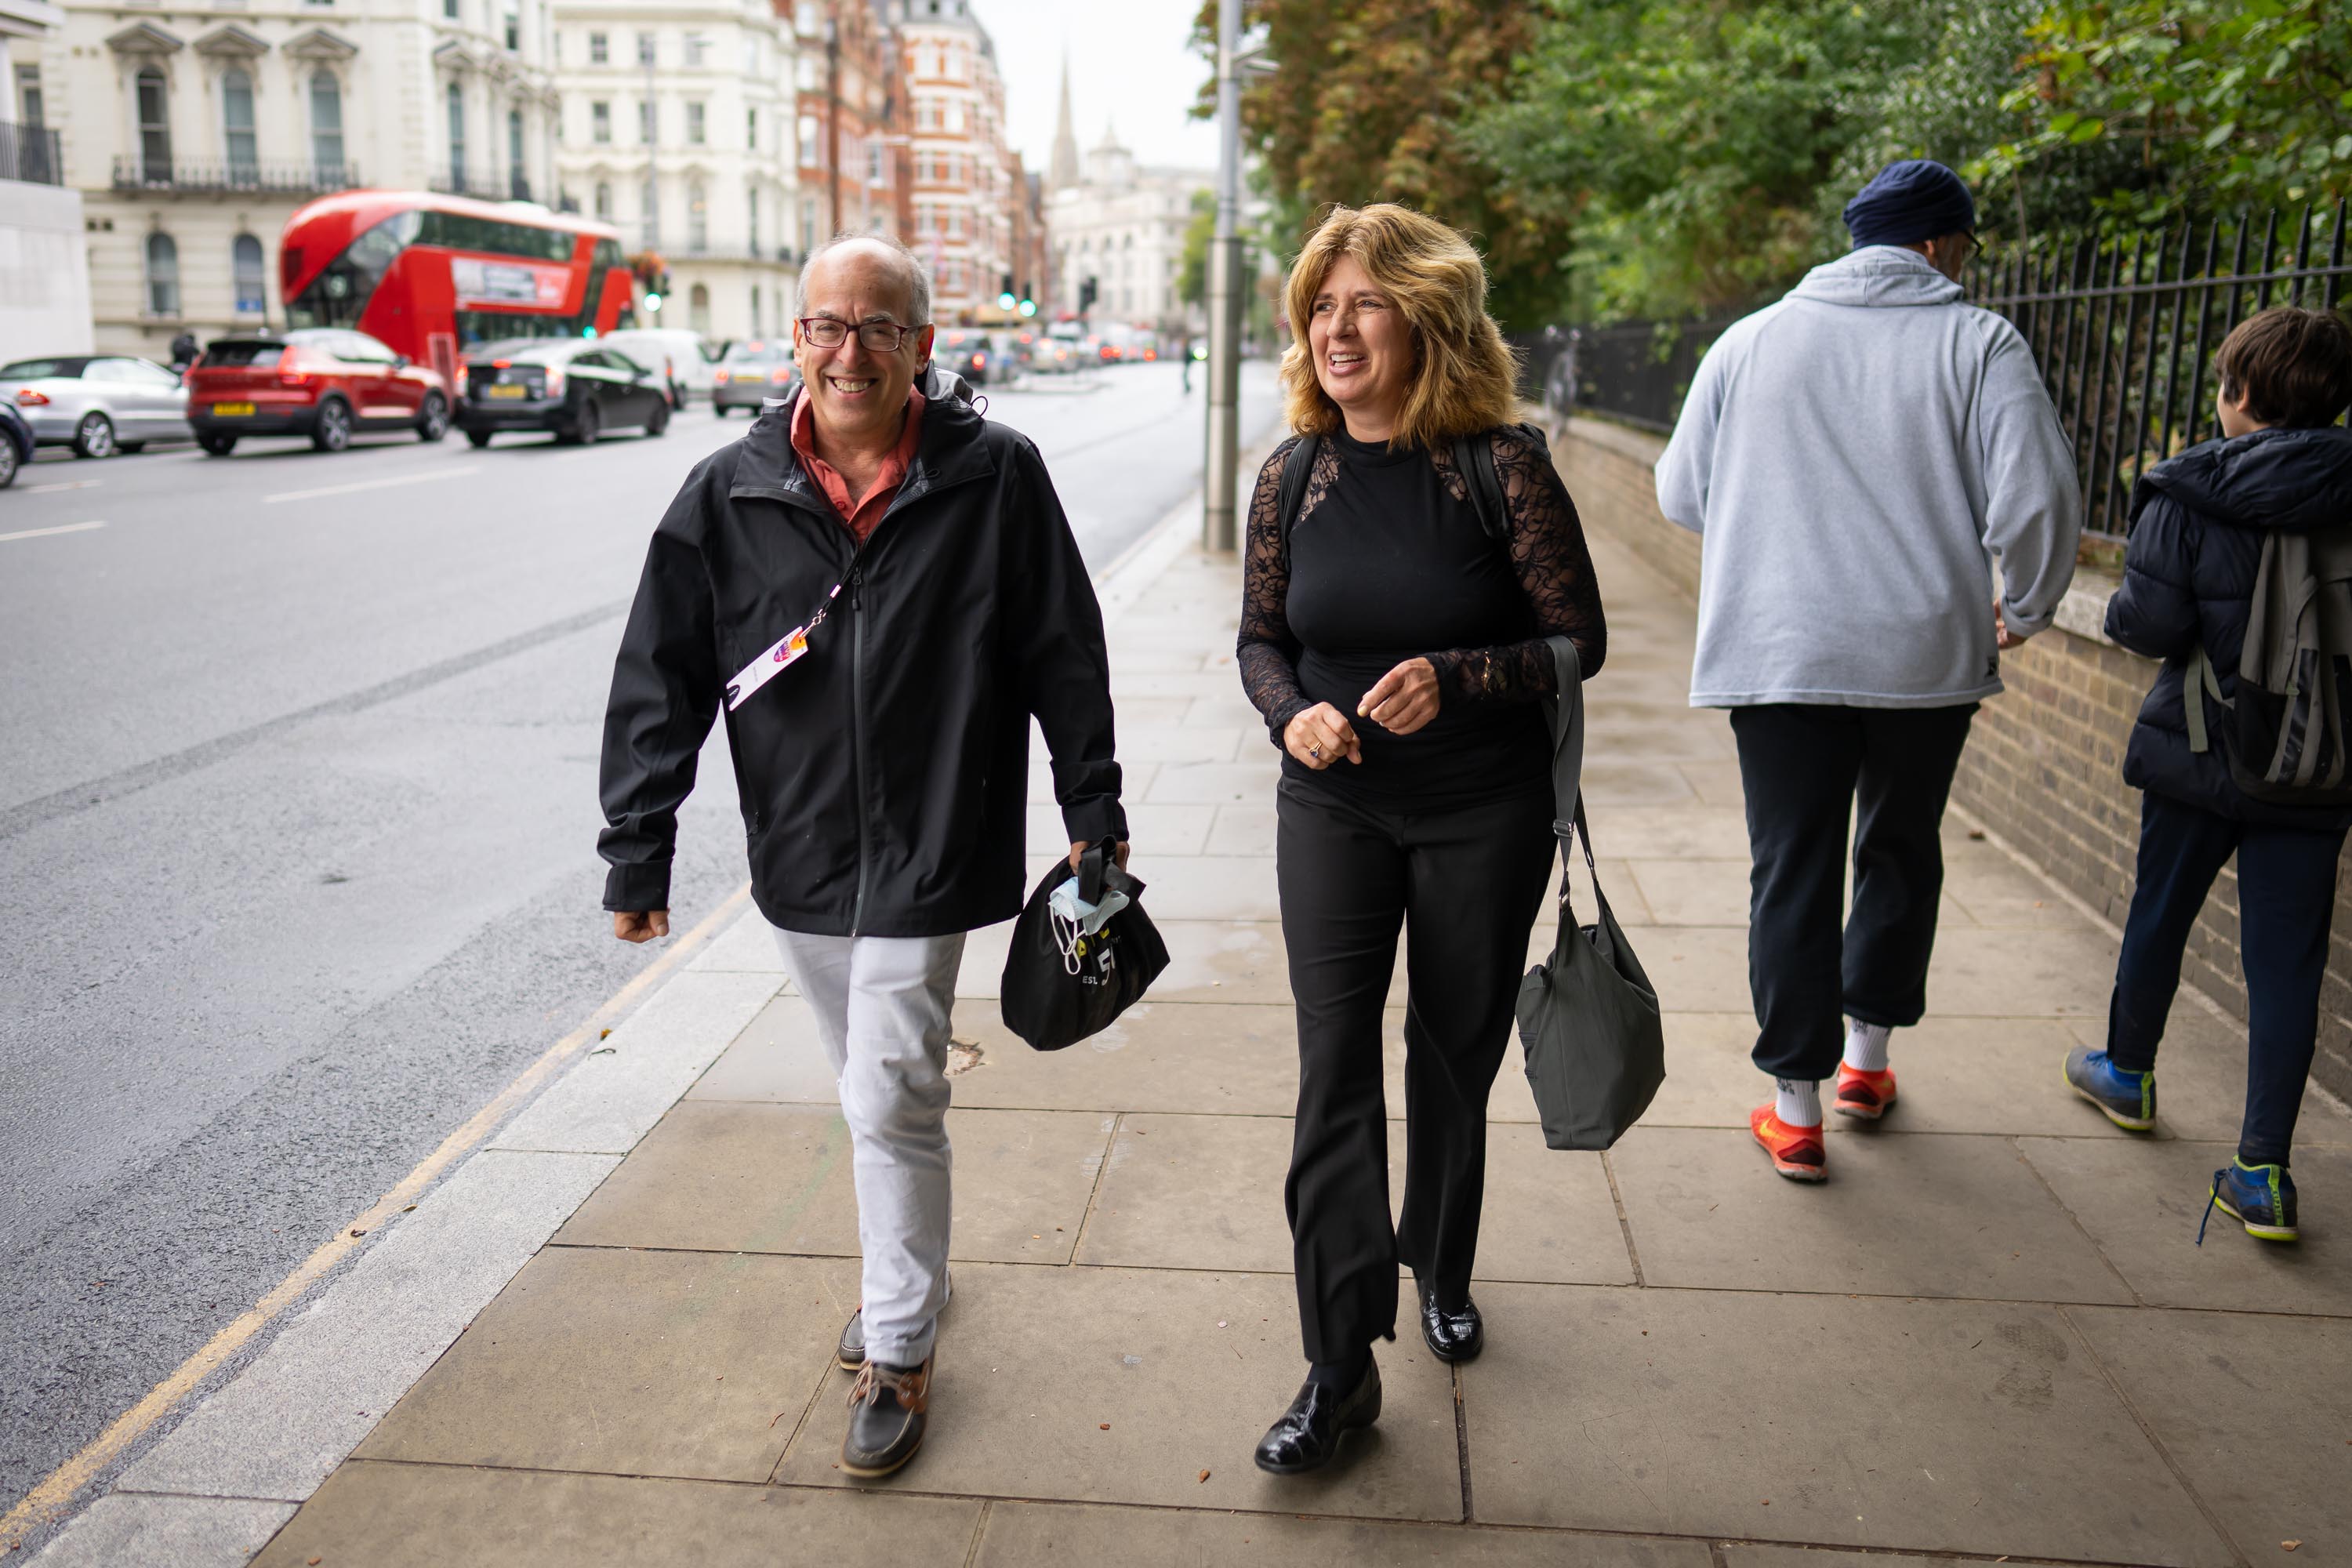 Violinist Paul Arnold and English horn player Elizabeth Masoudnia walk from the hotel to the Royal Albert Hall